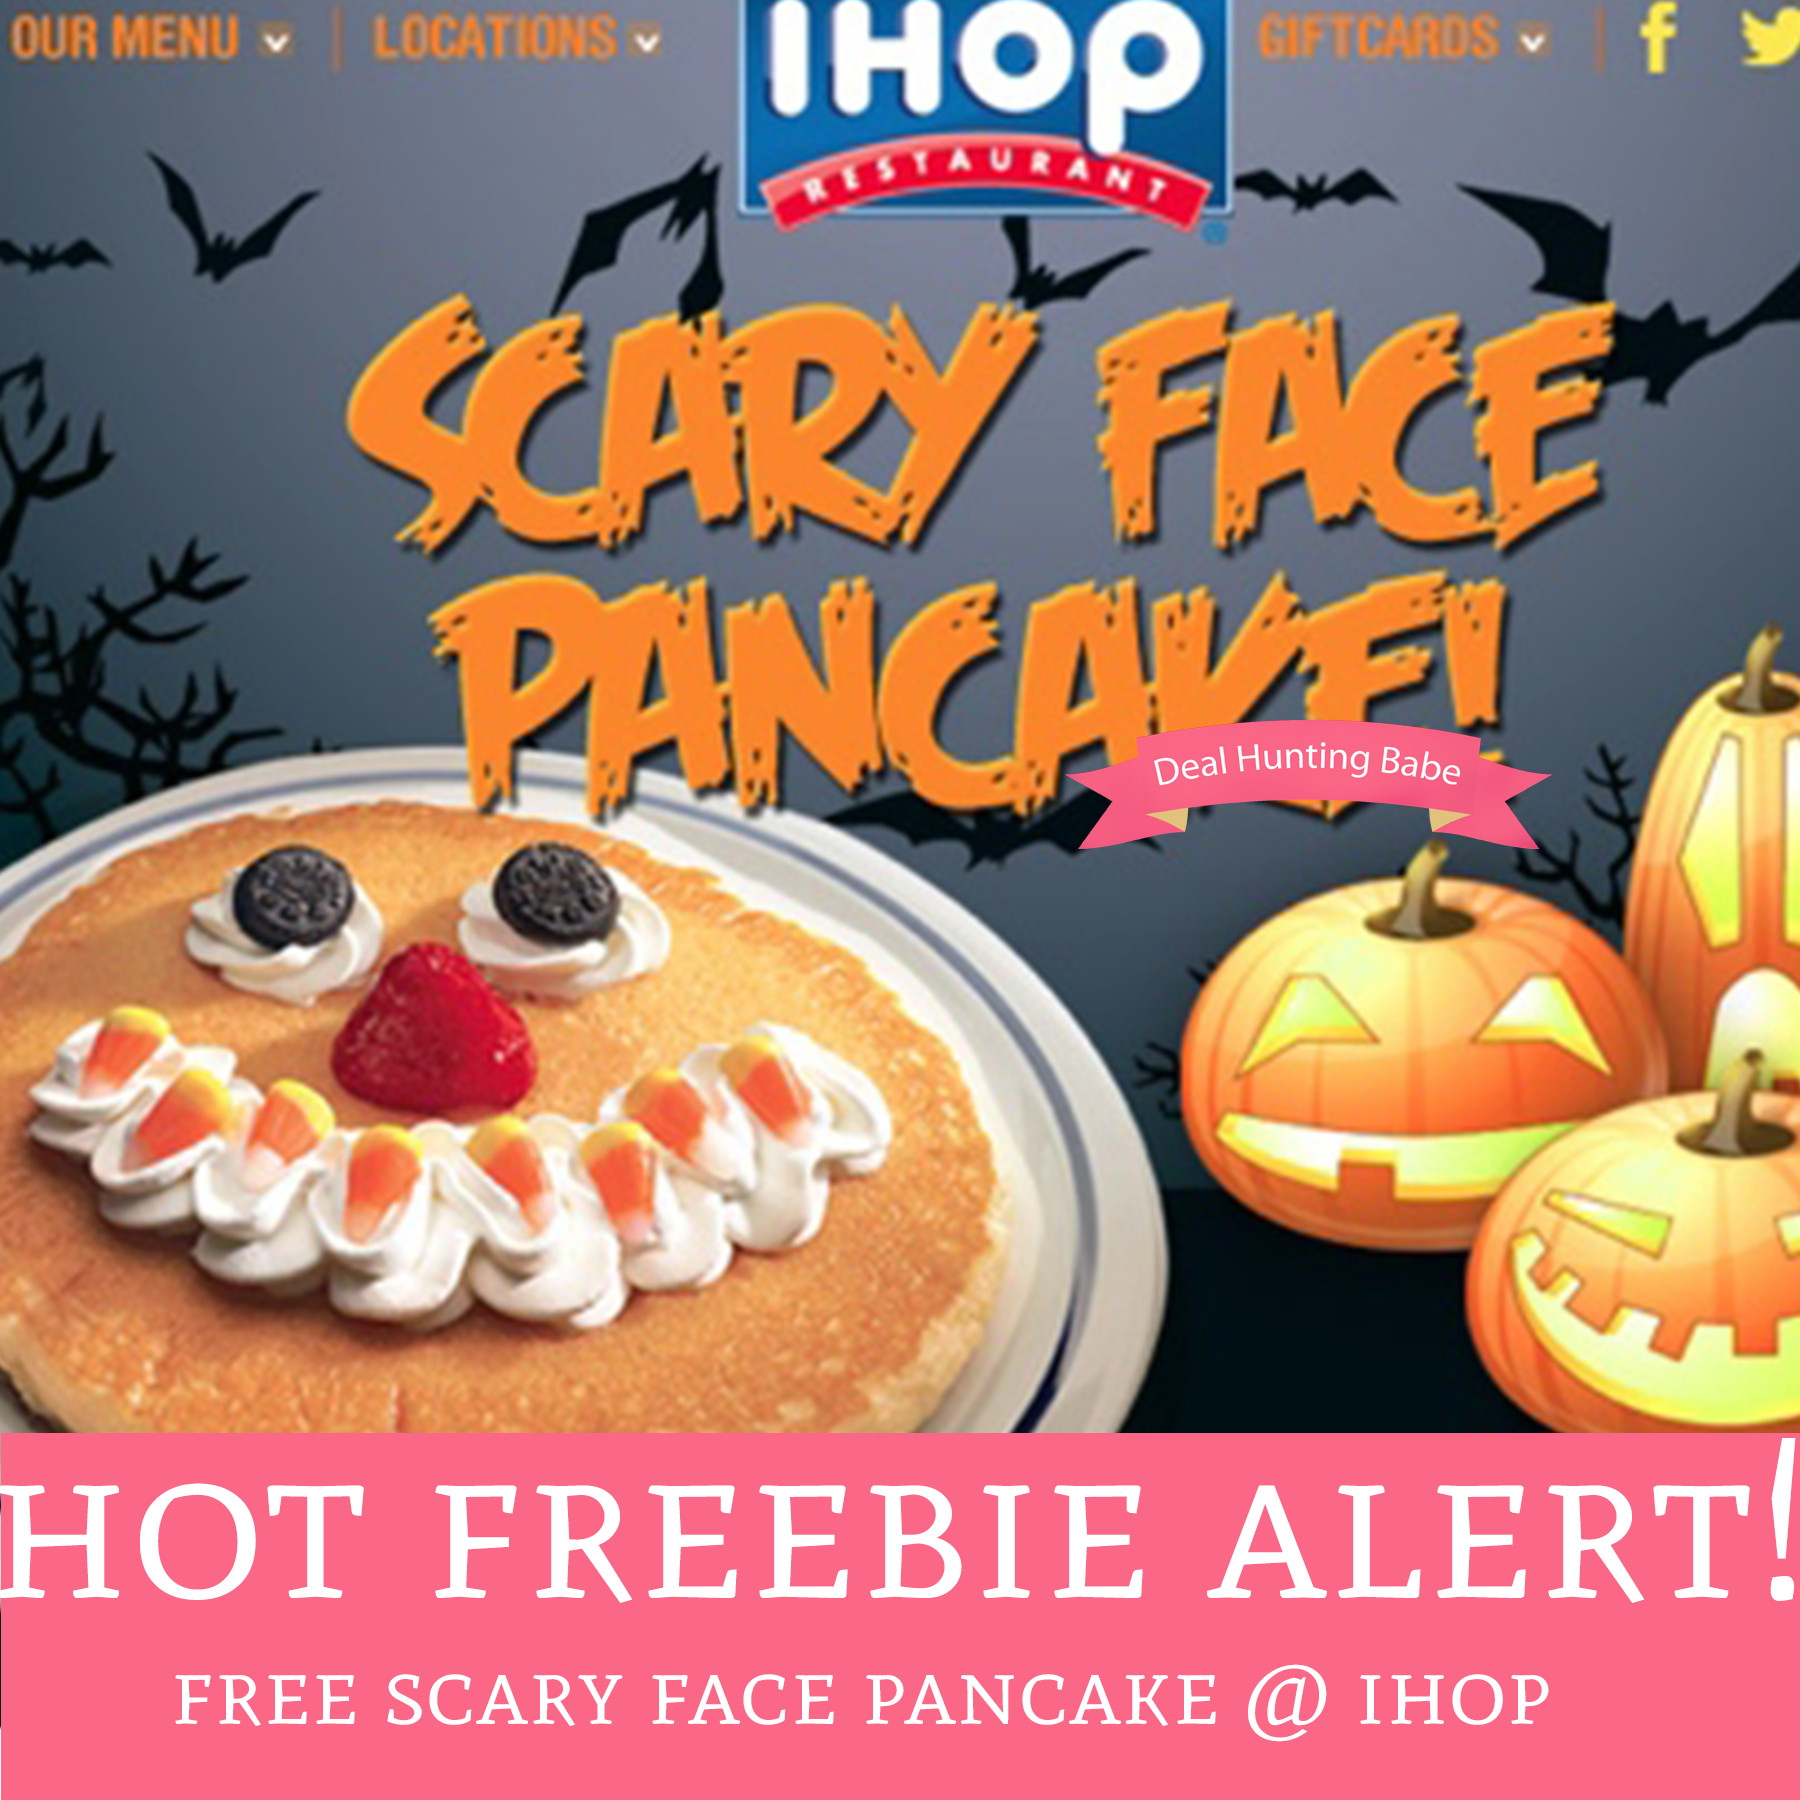 Ihop Halloween Free Pancakes 2019
 FREE Scary Face Pancakes IHOP Deal Hunting Babe